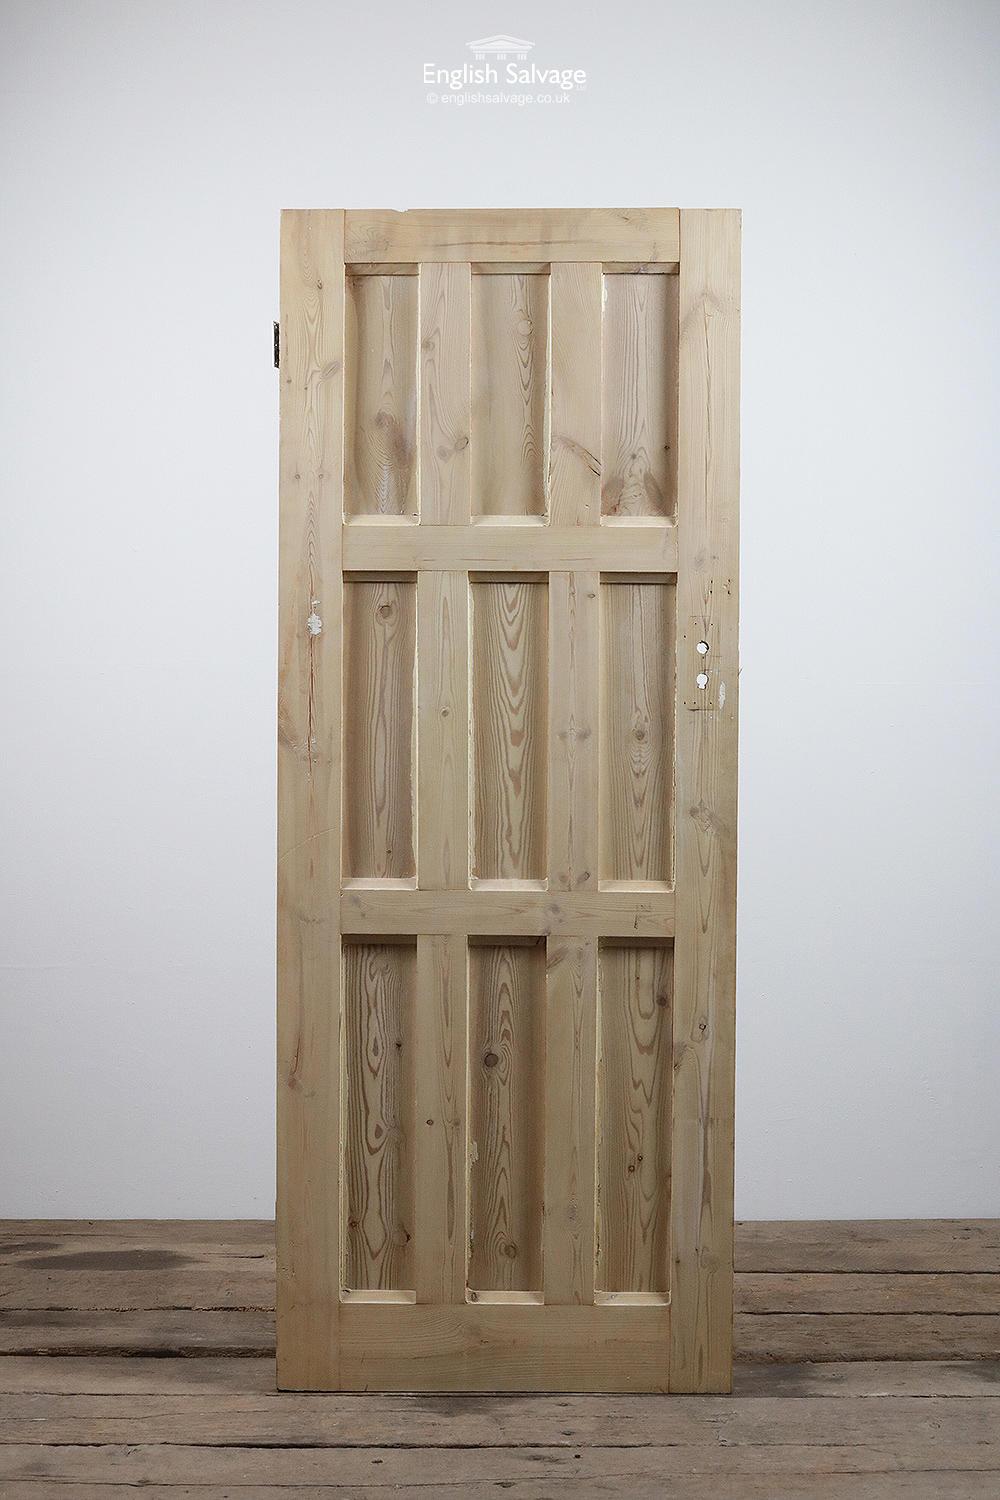 Salvaged Nine Panel Pine Door, 20th Century In Good Condition For Sale In London, GB